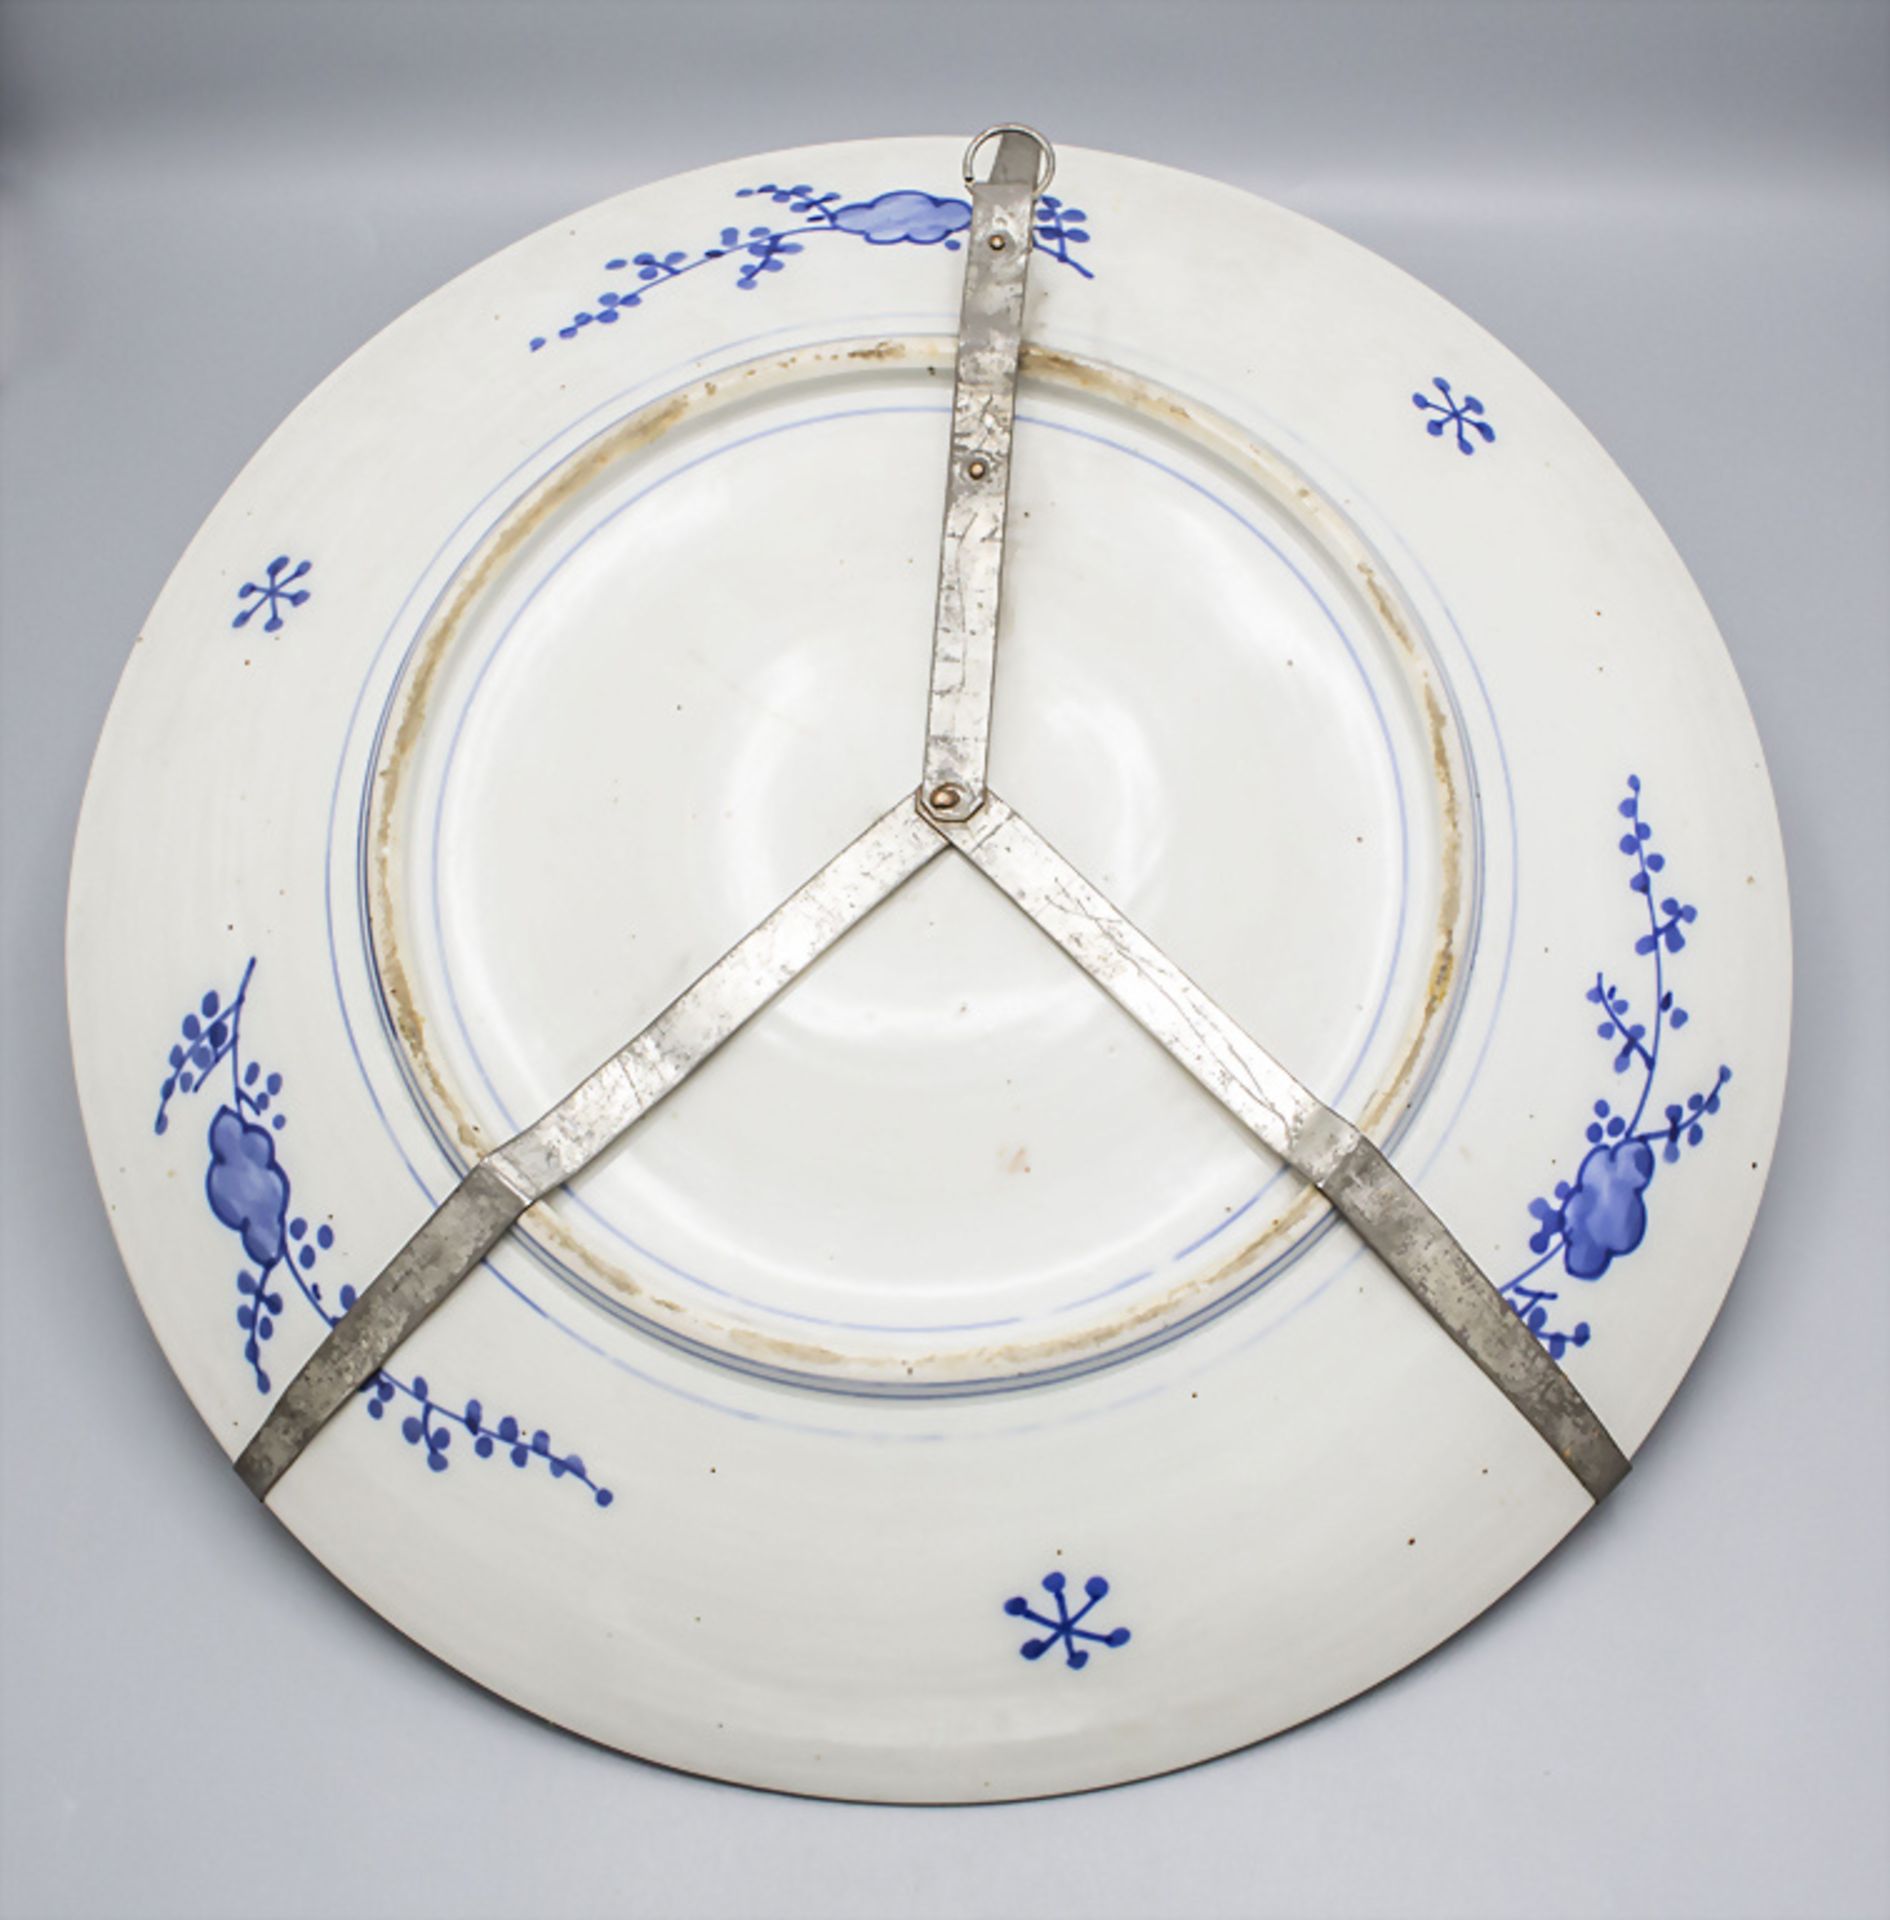 Großer Teller / A large plate, wohl China 18. Jh. - Image 4 of 4